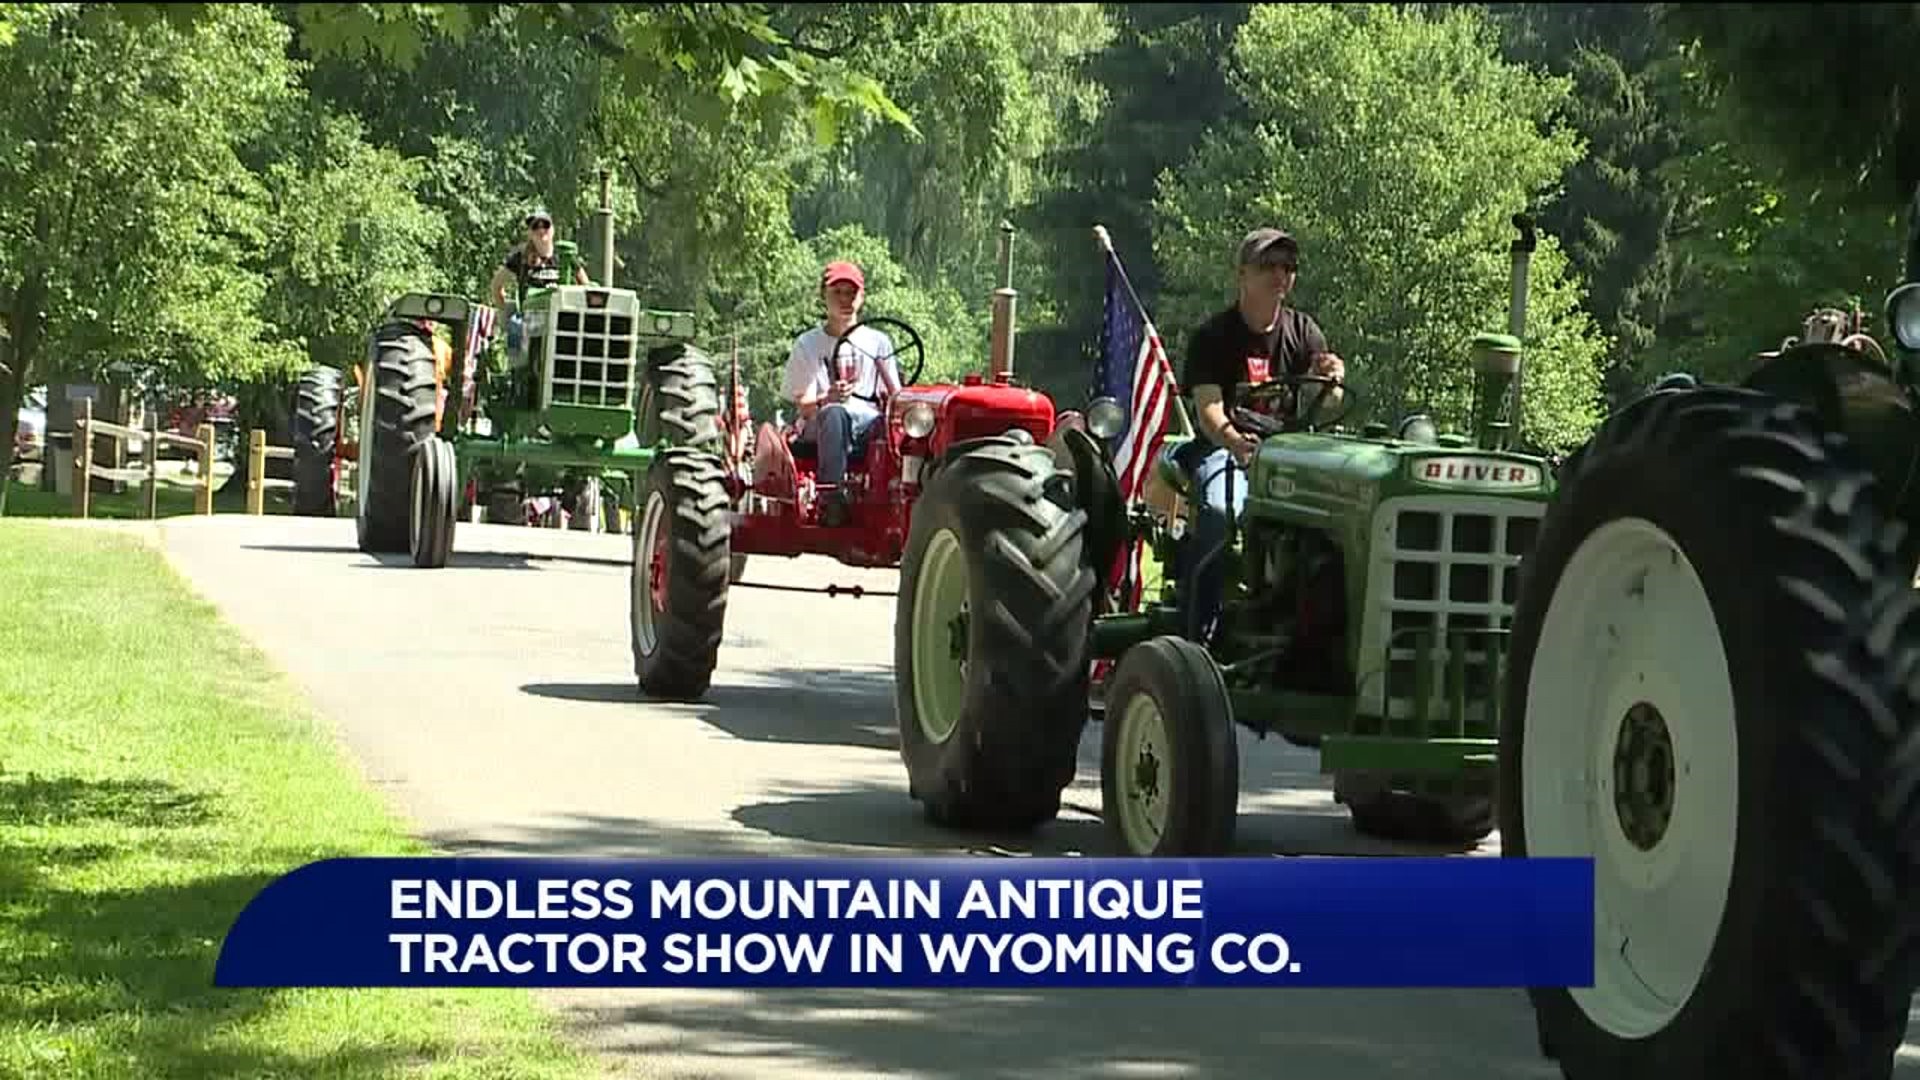 Endless Mountain Antique Tractor Show